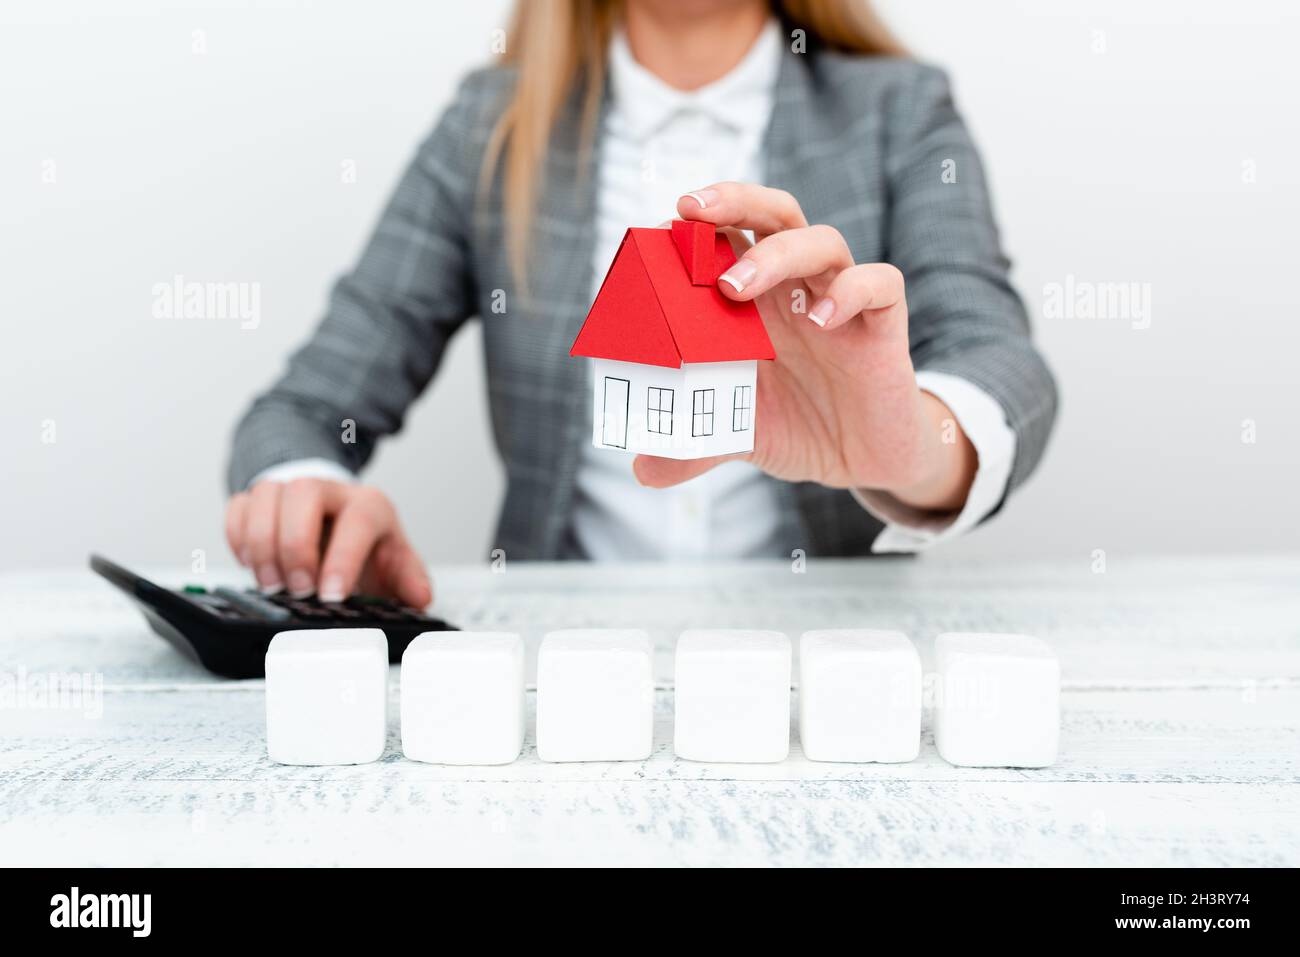 A Lady Holding Home In Business Outfit Presenting Possible Calculations For Owning Real Estate. Signing New Contract Orinsurance Stock Photo